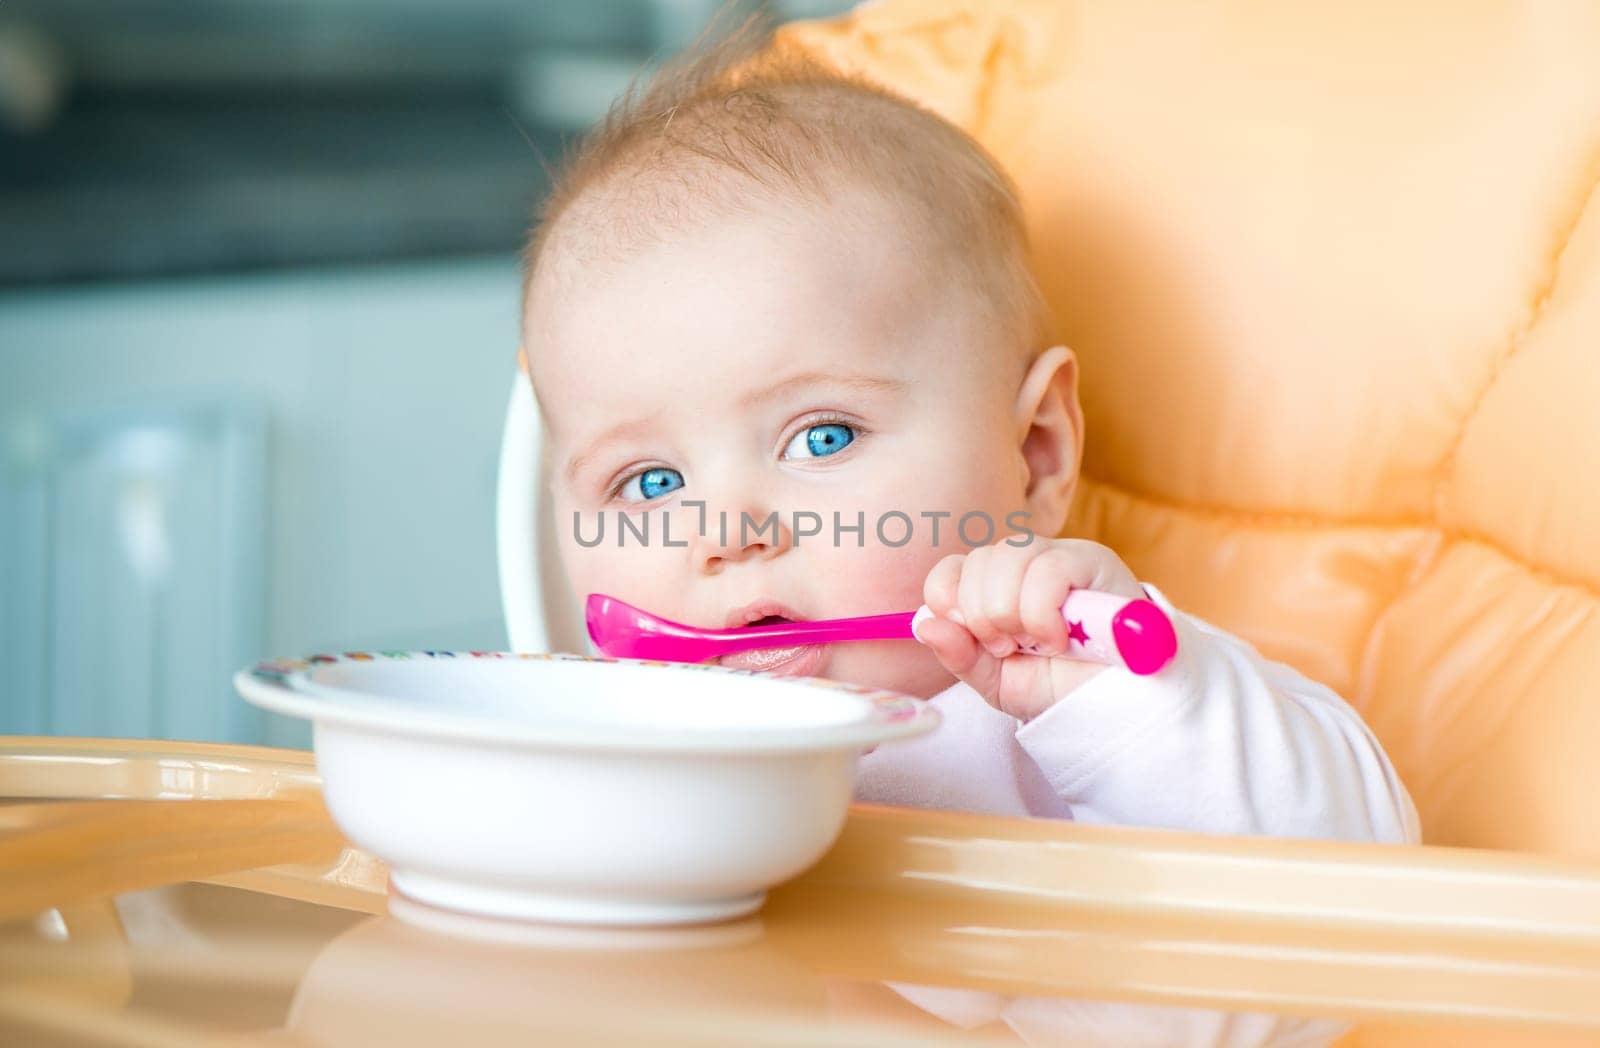 smiley baby girl is holding a spoon in her mouth and going to eat